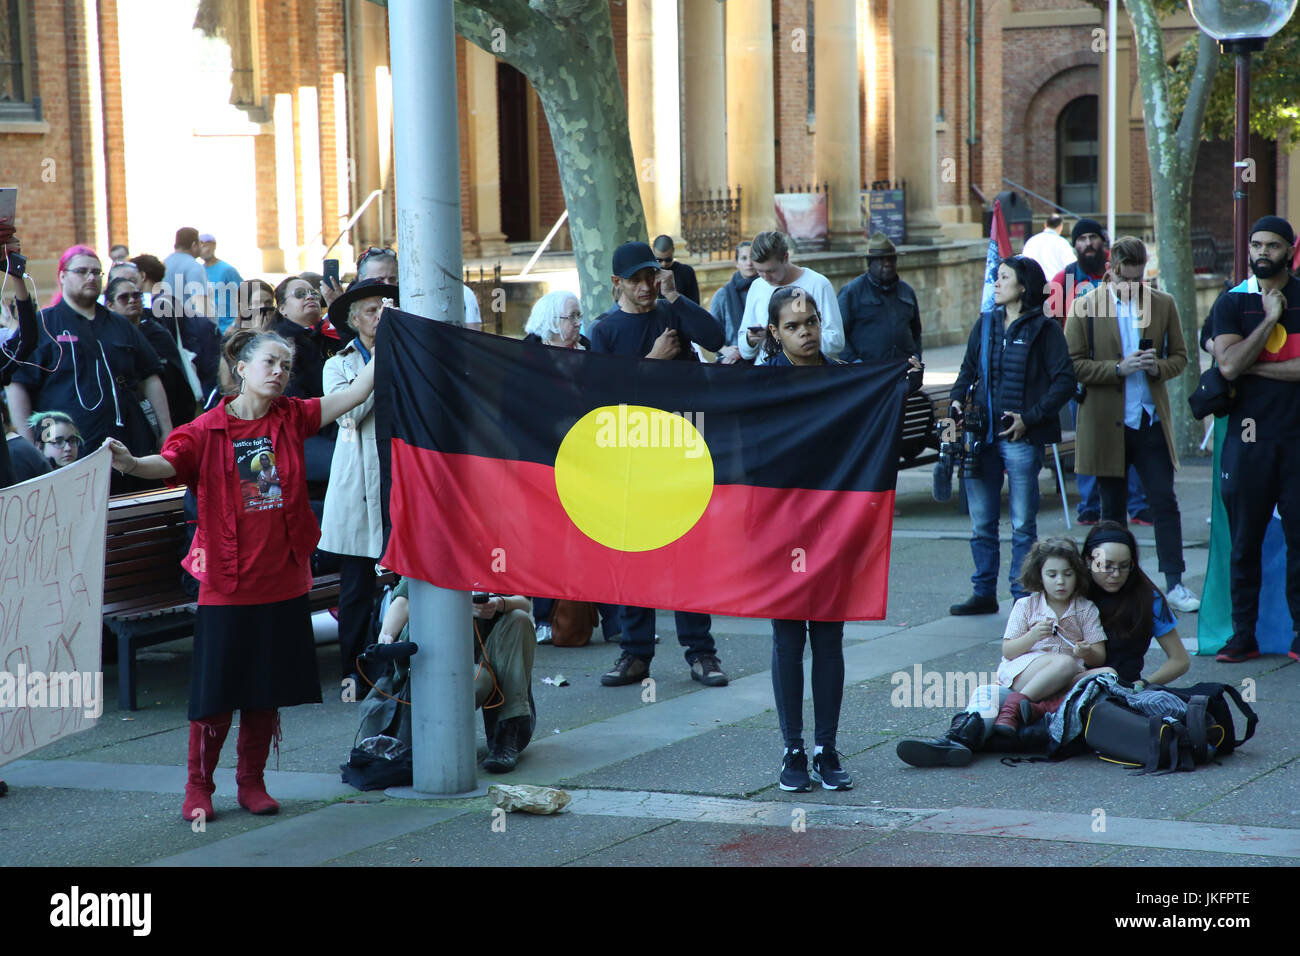 Sydney, Australia. 24 July 2017. Protesters rallied outside the Supreme Court of NSW in Sydney following the court verdict in the case of 14-year old Aboriginal boy, Elijah Doughty who was killed on 29 August 2016 in Kalgoorlie, Western Australia. A 56-year old man who had pursued Elijah, who was riding a dirt bike that some believe to have been stolen from the man the day before, but which supporters believe belonged to Elijah, was found not guilty of the charge of manslaughter but guilty of the lesser charge of dangerous driving occasioning death. Credit: Richard Milnes/Alamy Live News Stock Photo